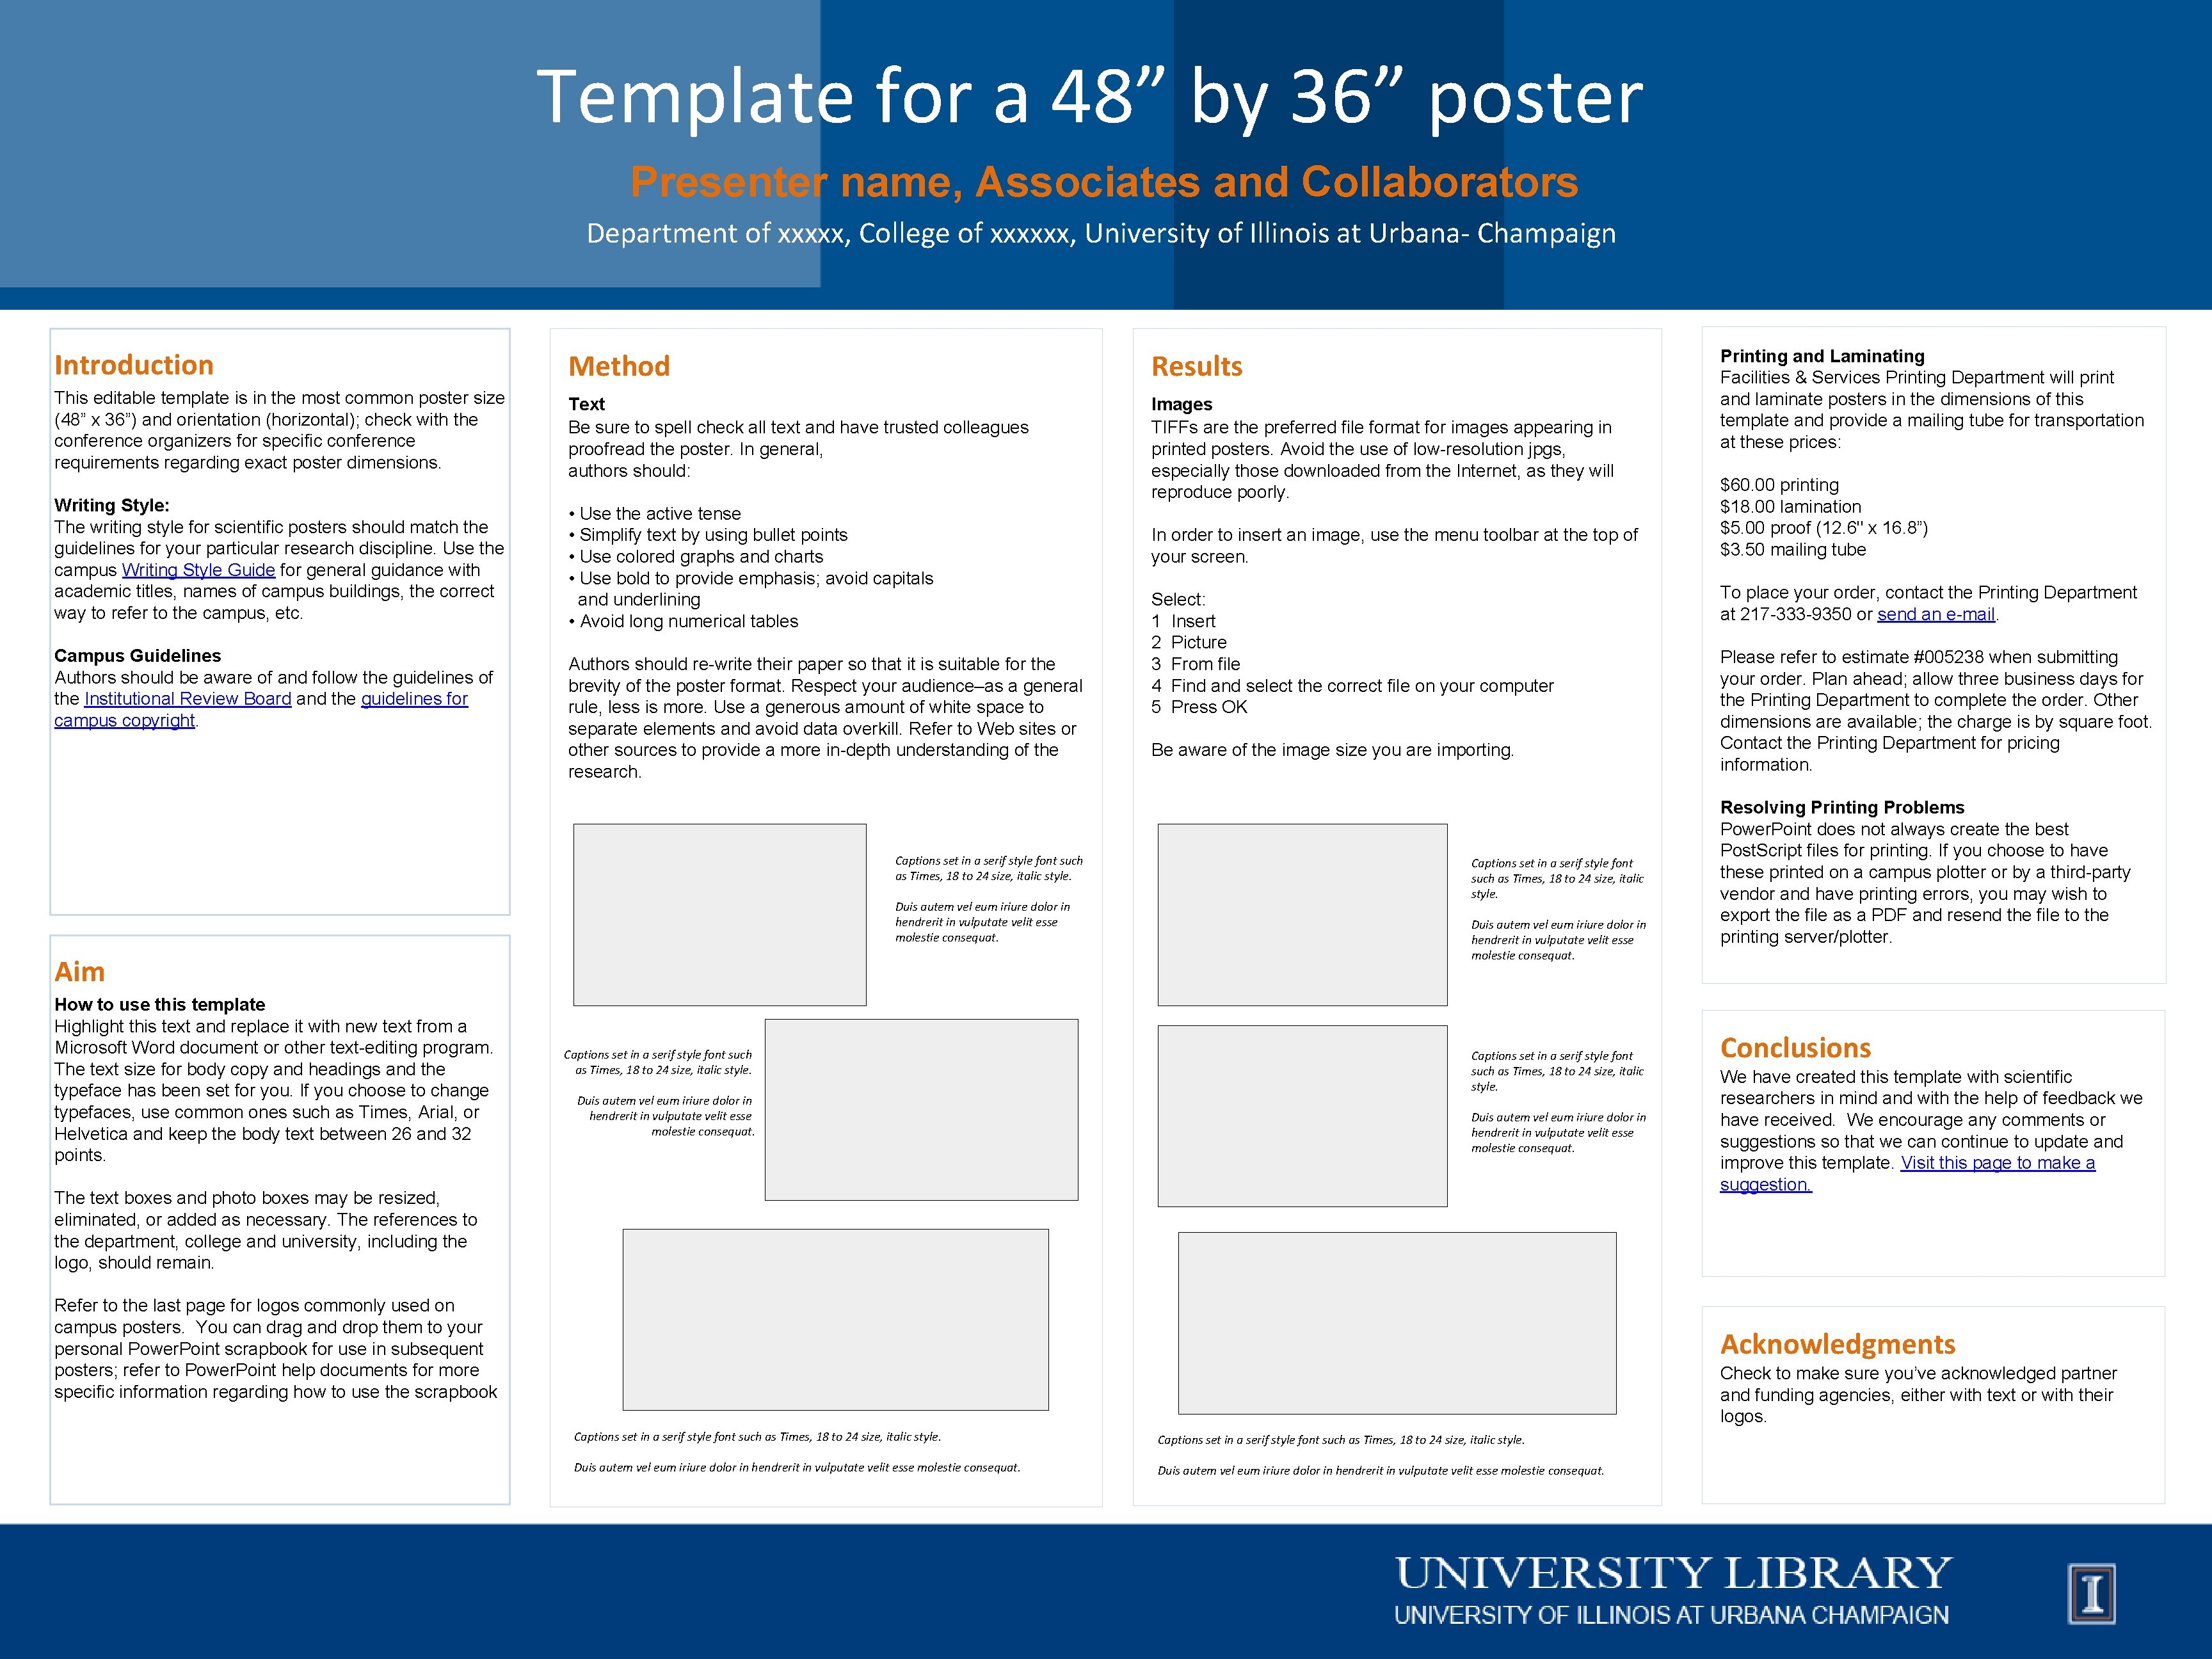 Template for a 48” by 36” poster Presenter name, Associates and Collaborators Department of